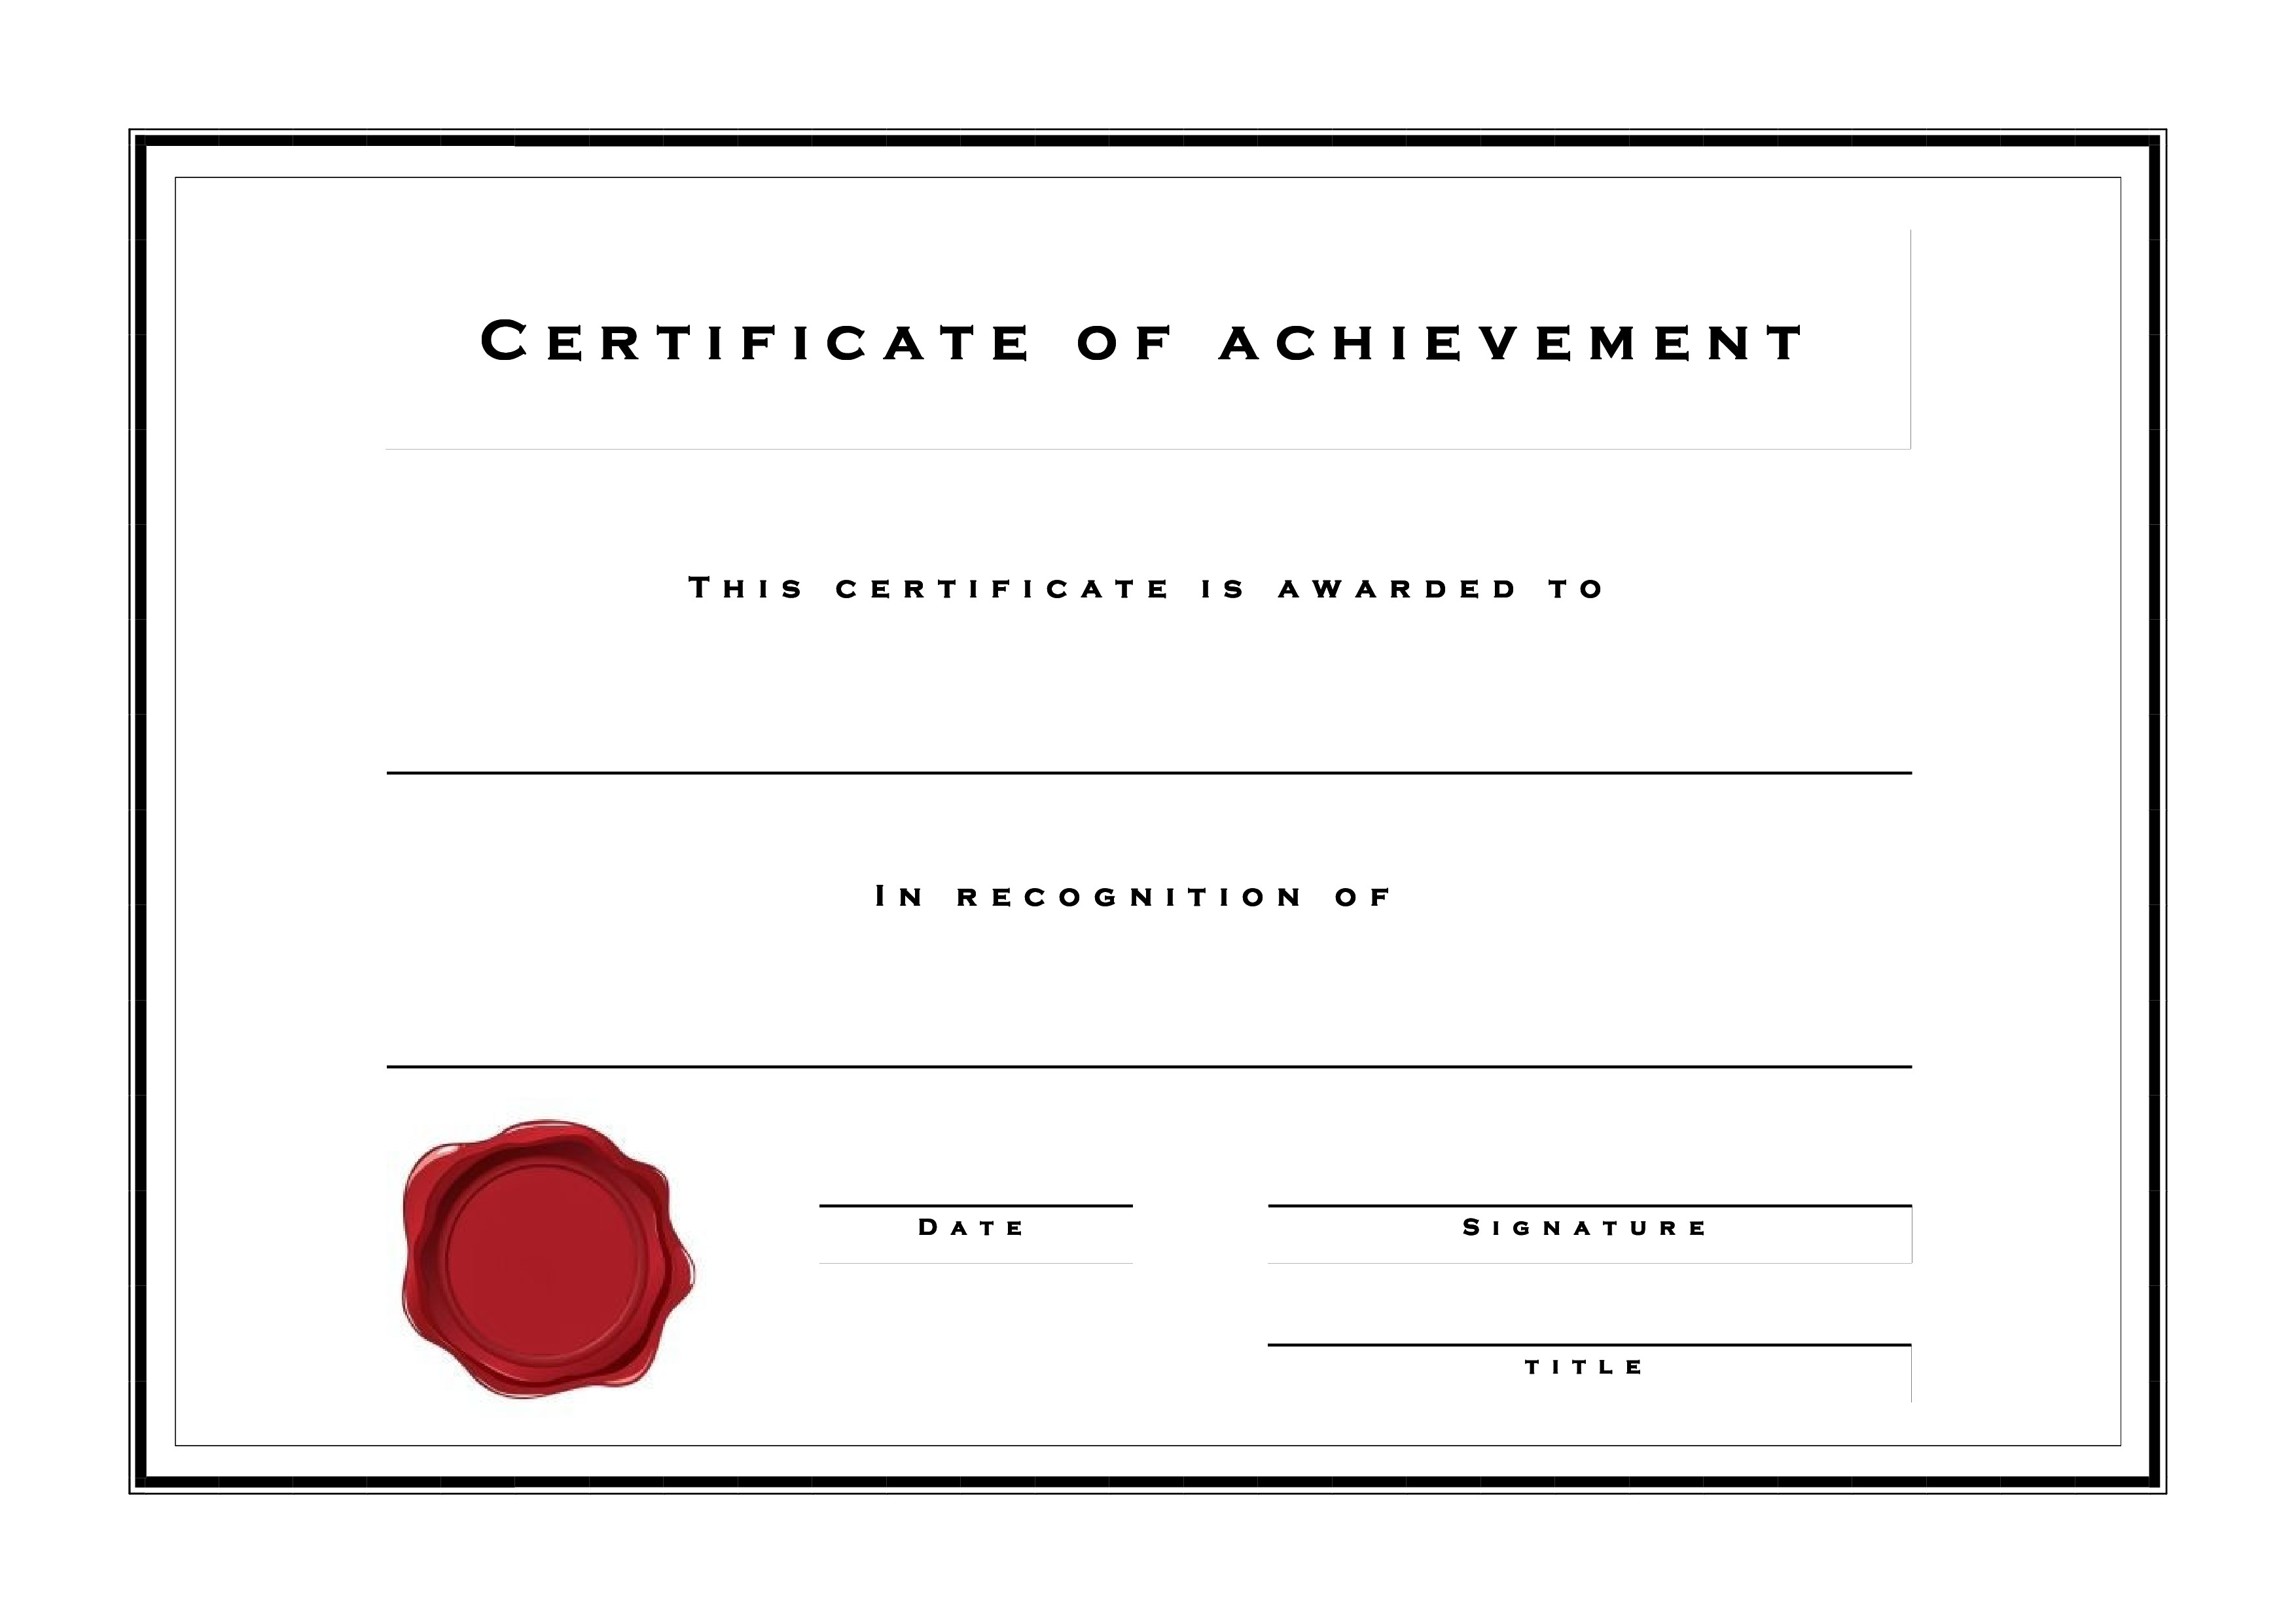 Formal Certificate Of Achievement main image